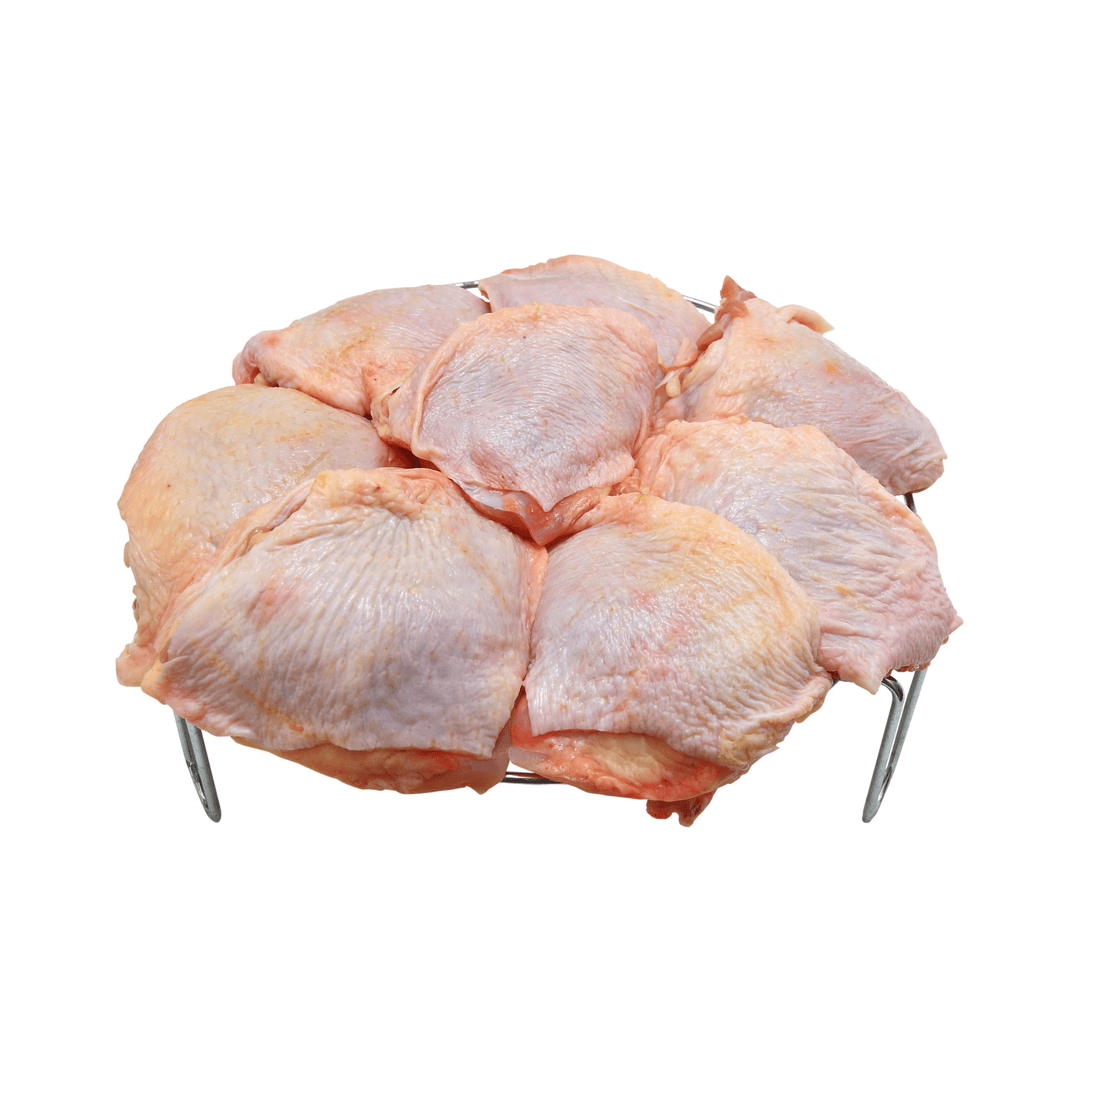 Chicken Thighs (2 Pack) - White's Family Farmhouse 